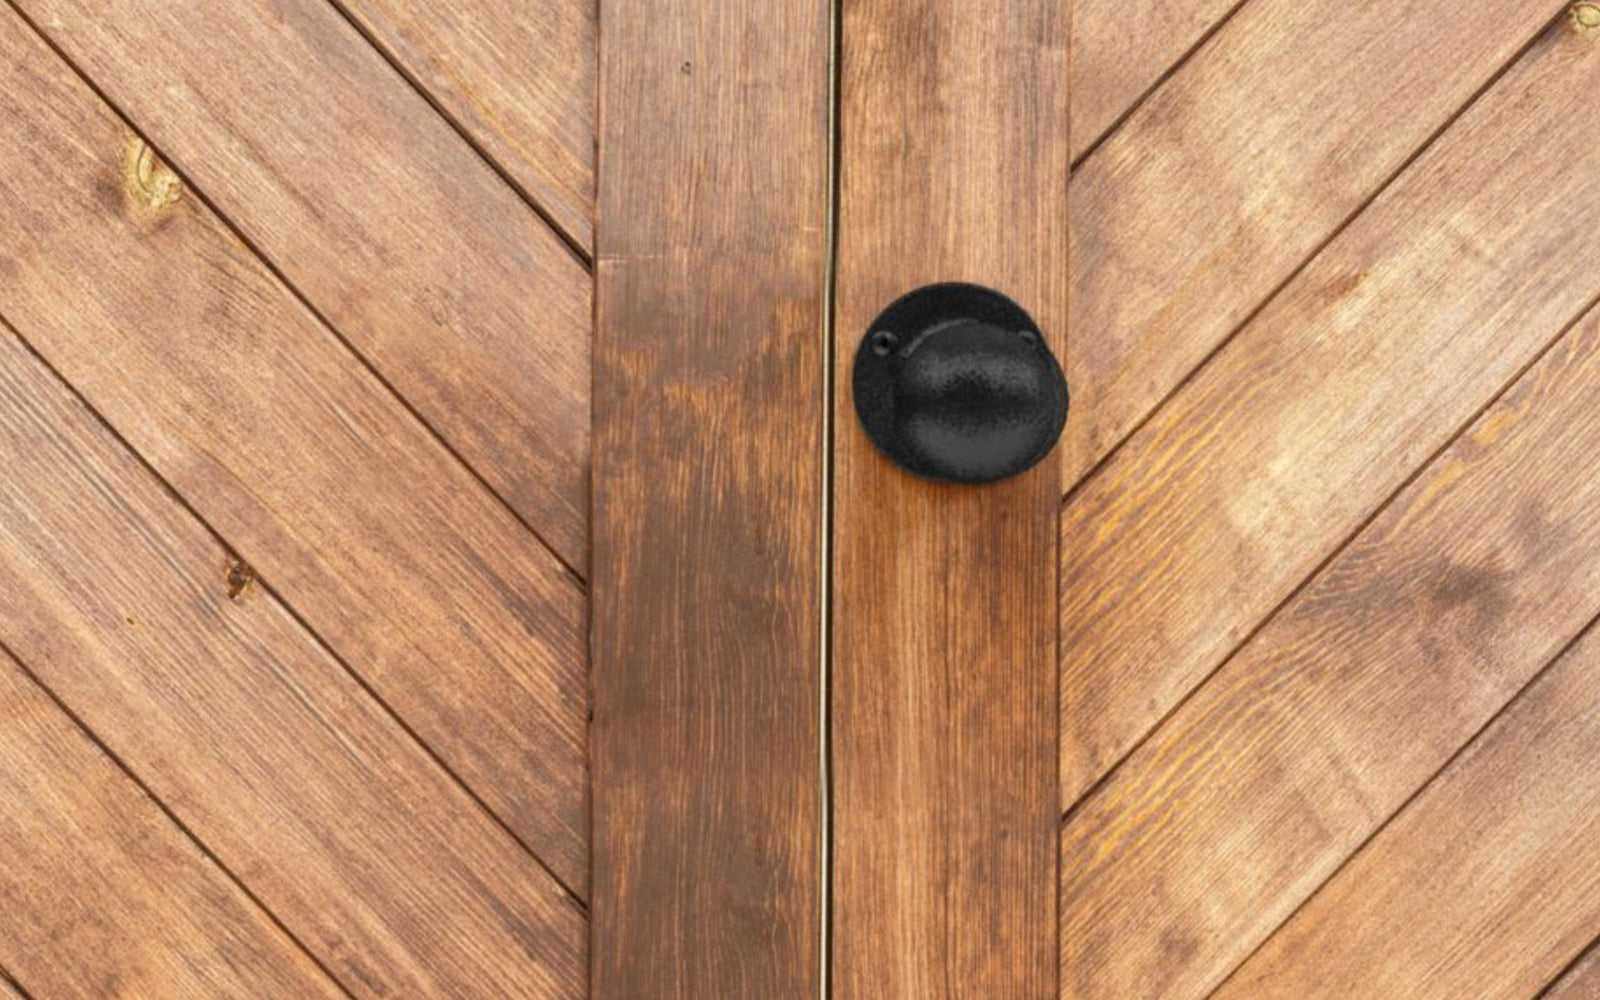 This decorative gate knob is designed for opening gates, sheds & doors. Black finish for style & durability. Mounting hardware included for easy installation. Decorative gate knob is fixed mounted. National Hardware Catalog Model No. N166-002. 886780029413